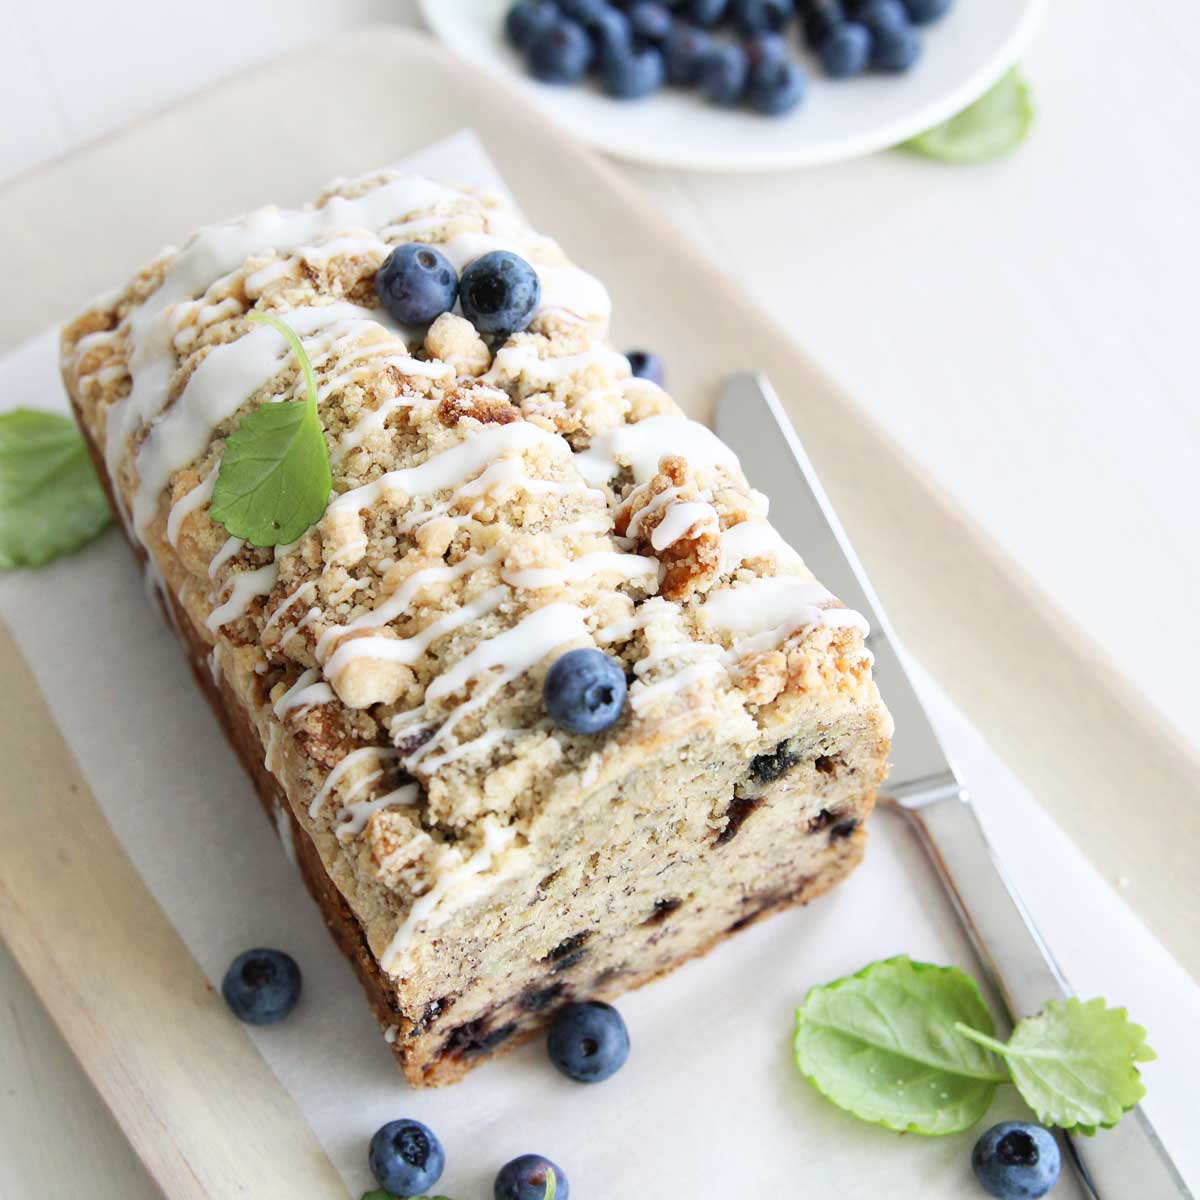 Blueberry Banana Bread with Oats & Streusel (Eggless, Dairy Free) - Vegan Chocolate Whipped Cream